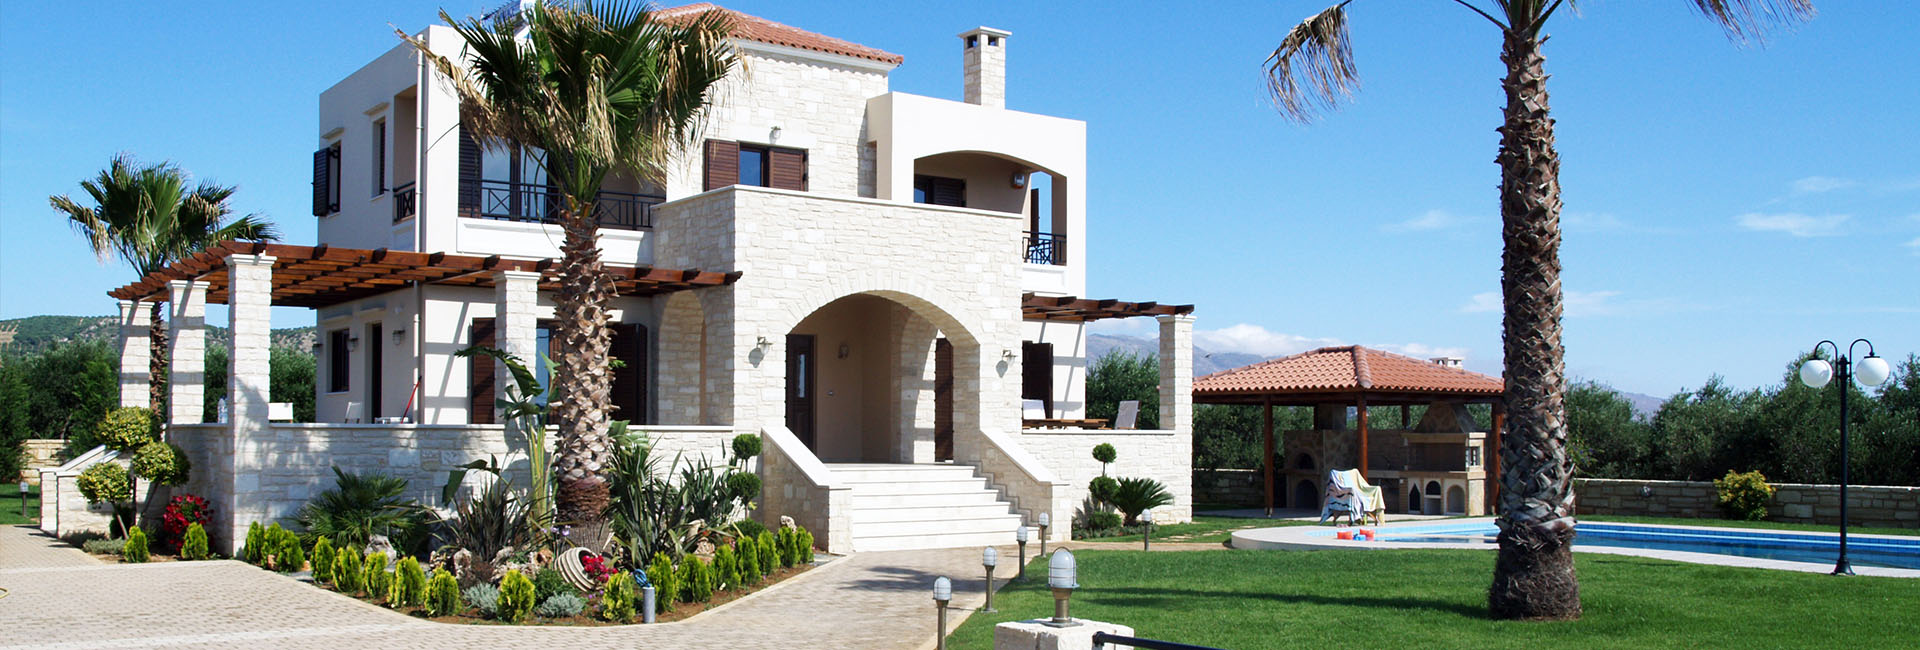 Olympos Real Estate Construction